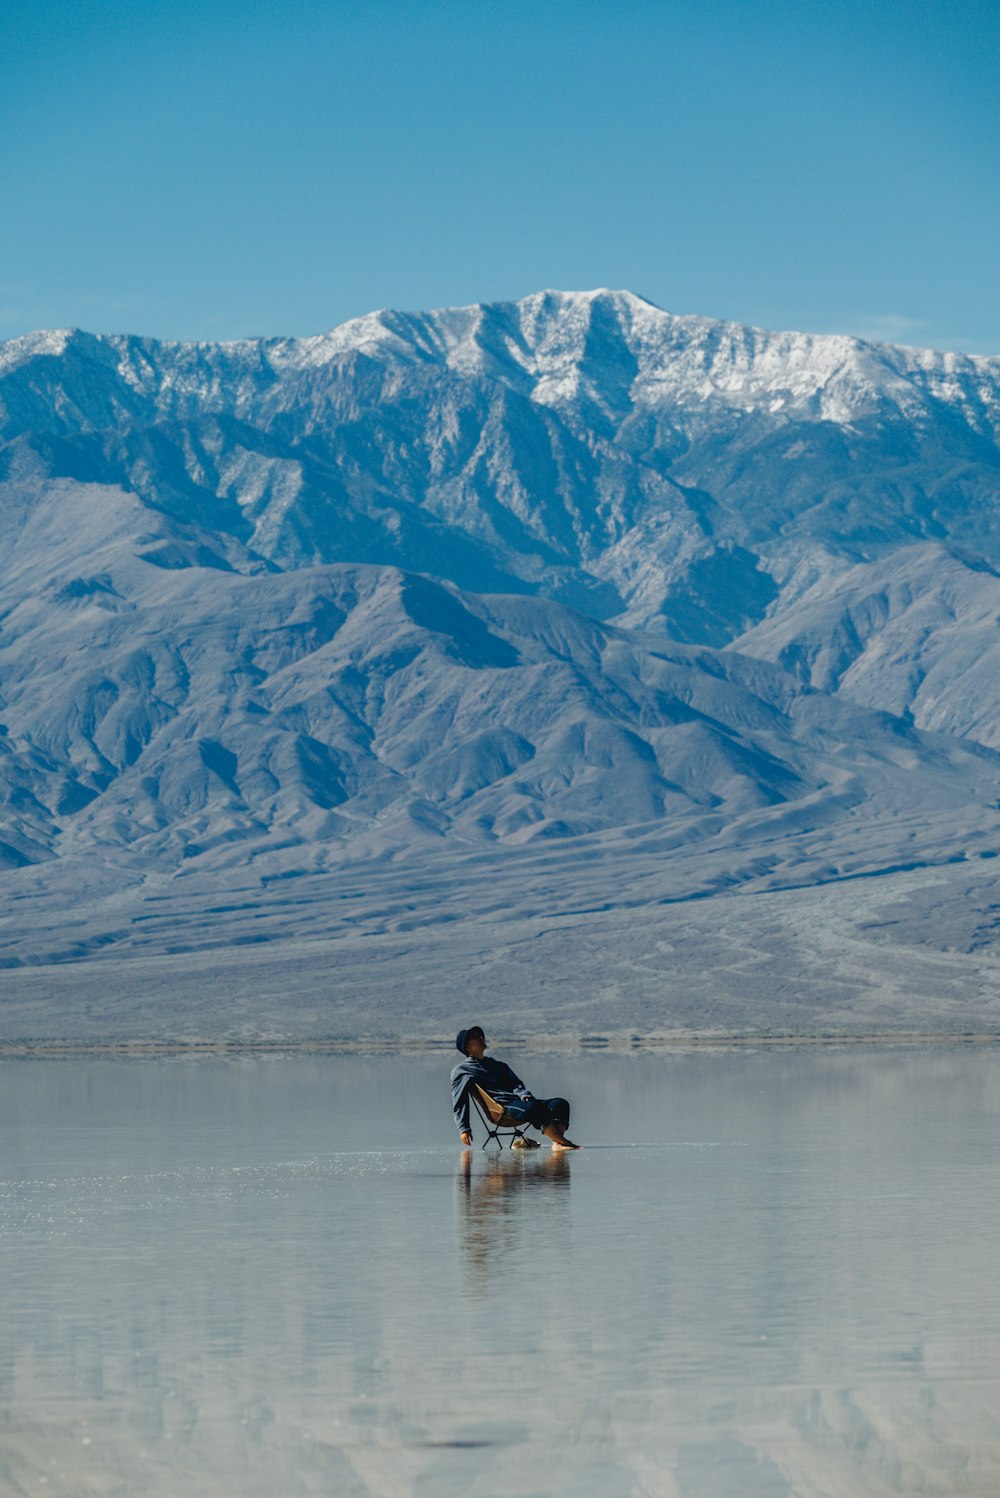 a man riding a surfboard on top of a lake